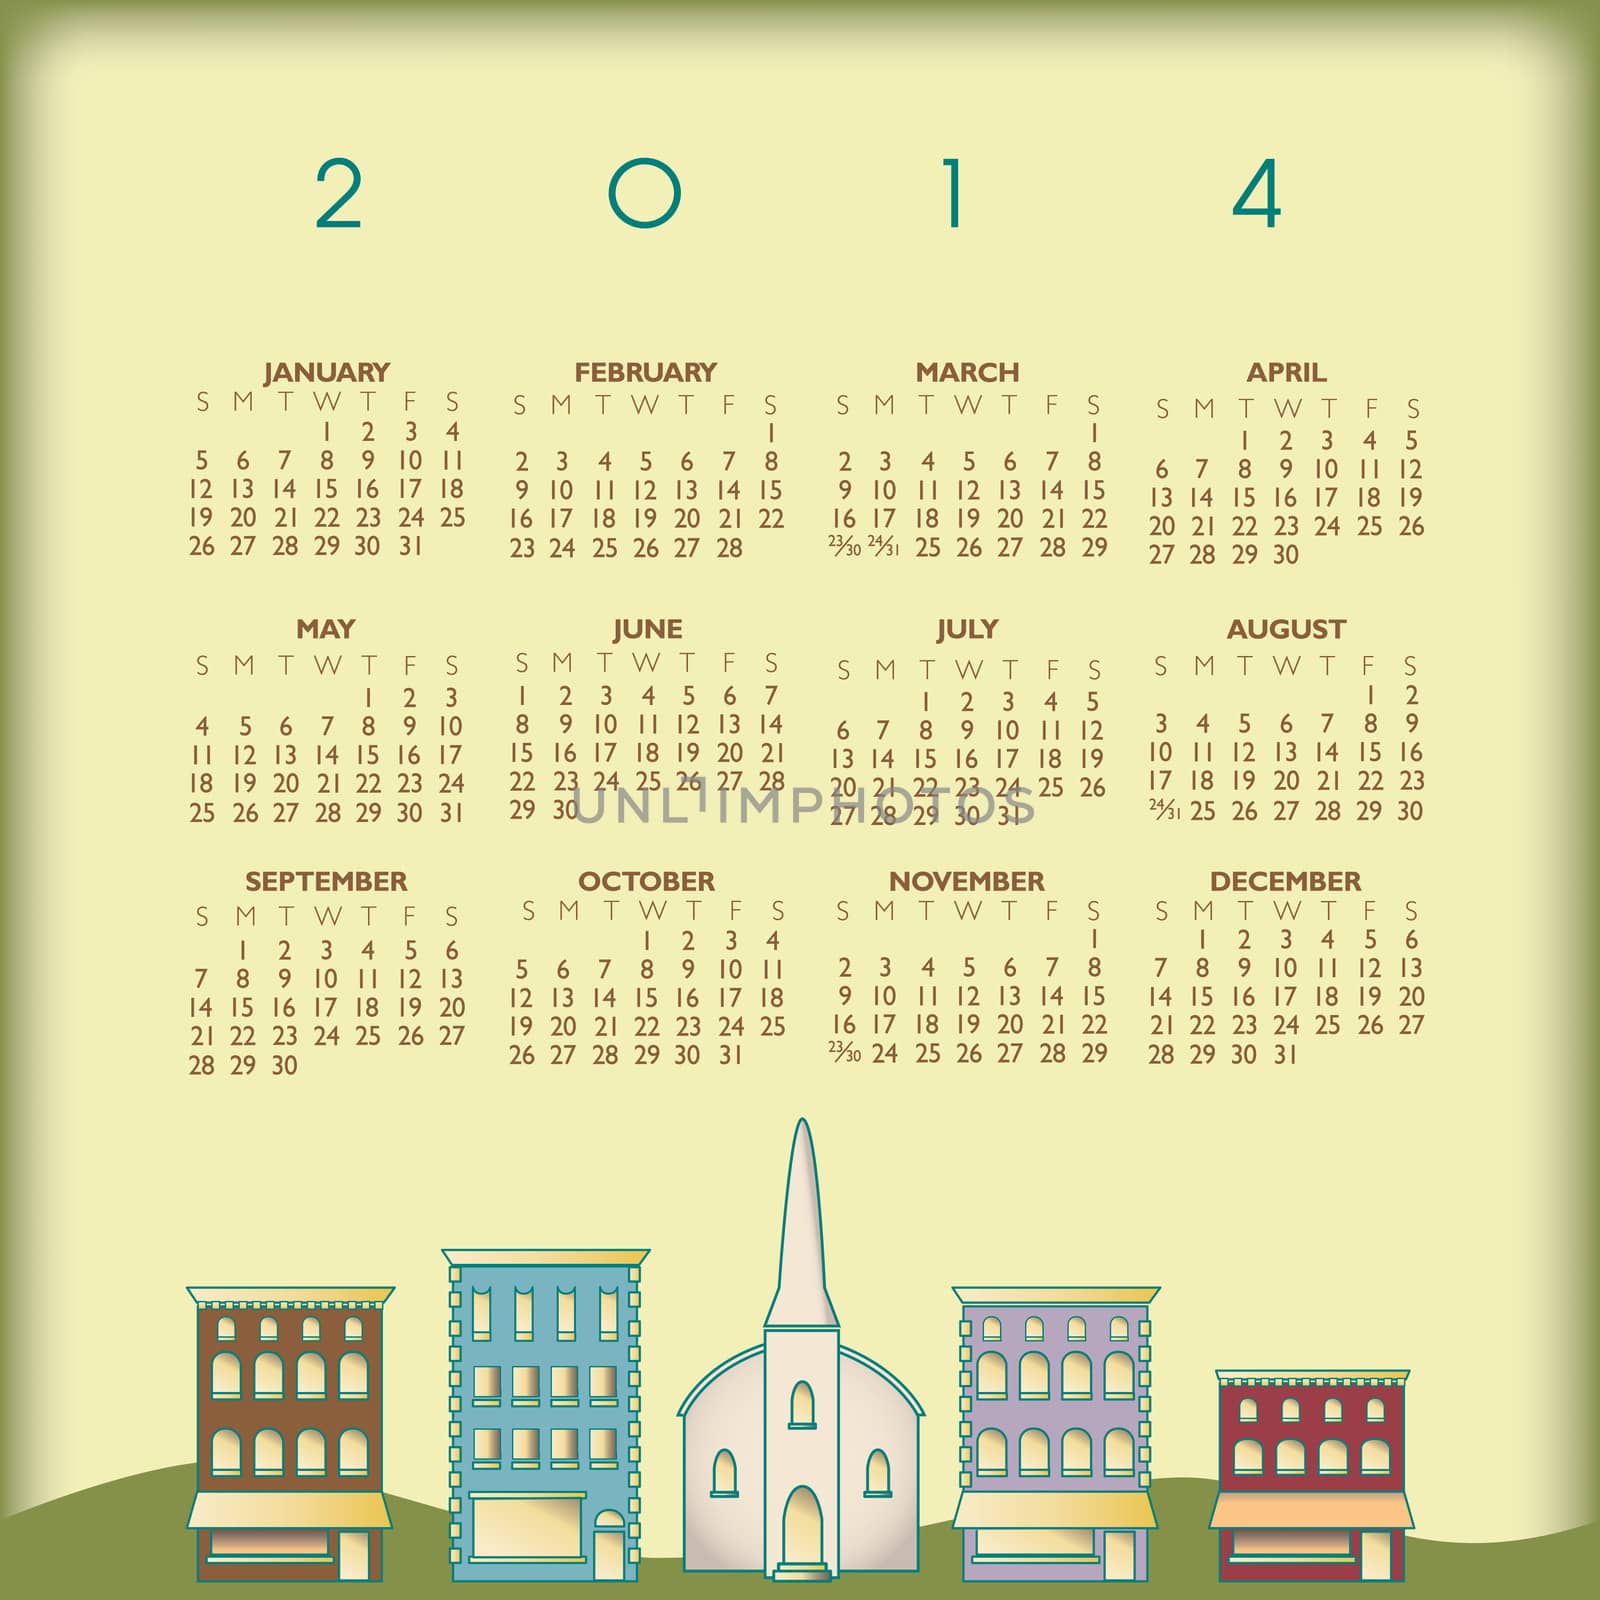 2014 Creative Small Town Calendar by mike301